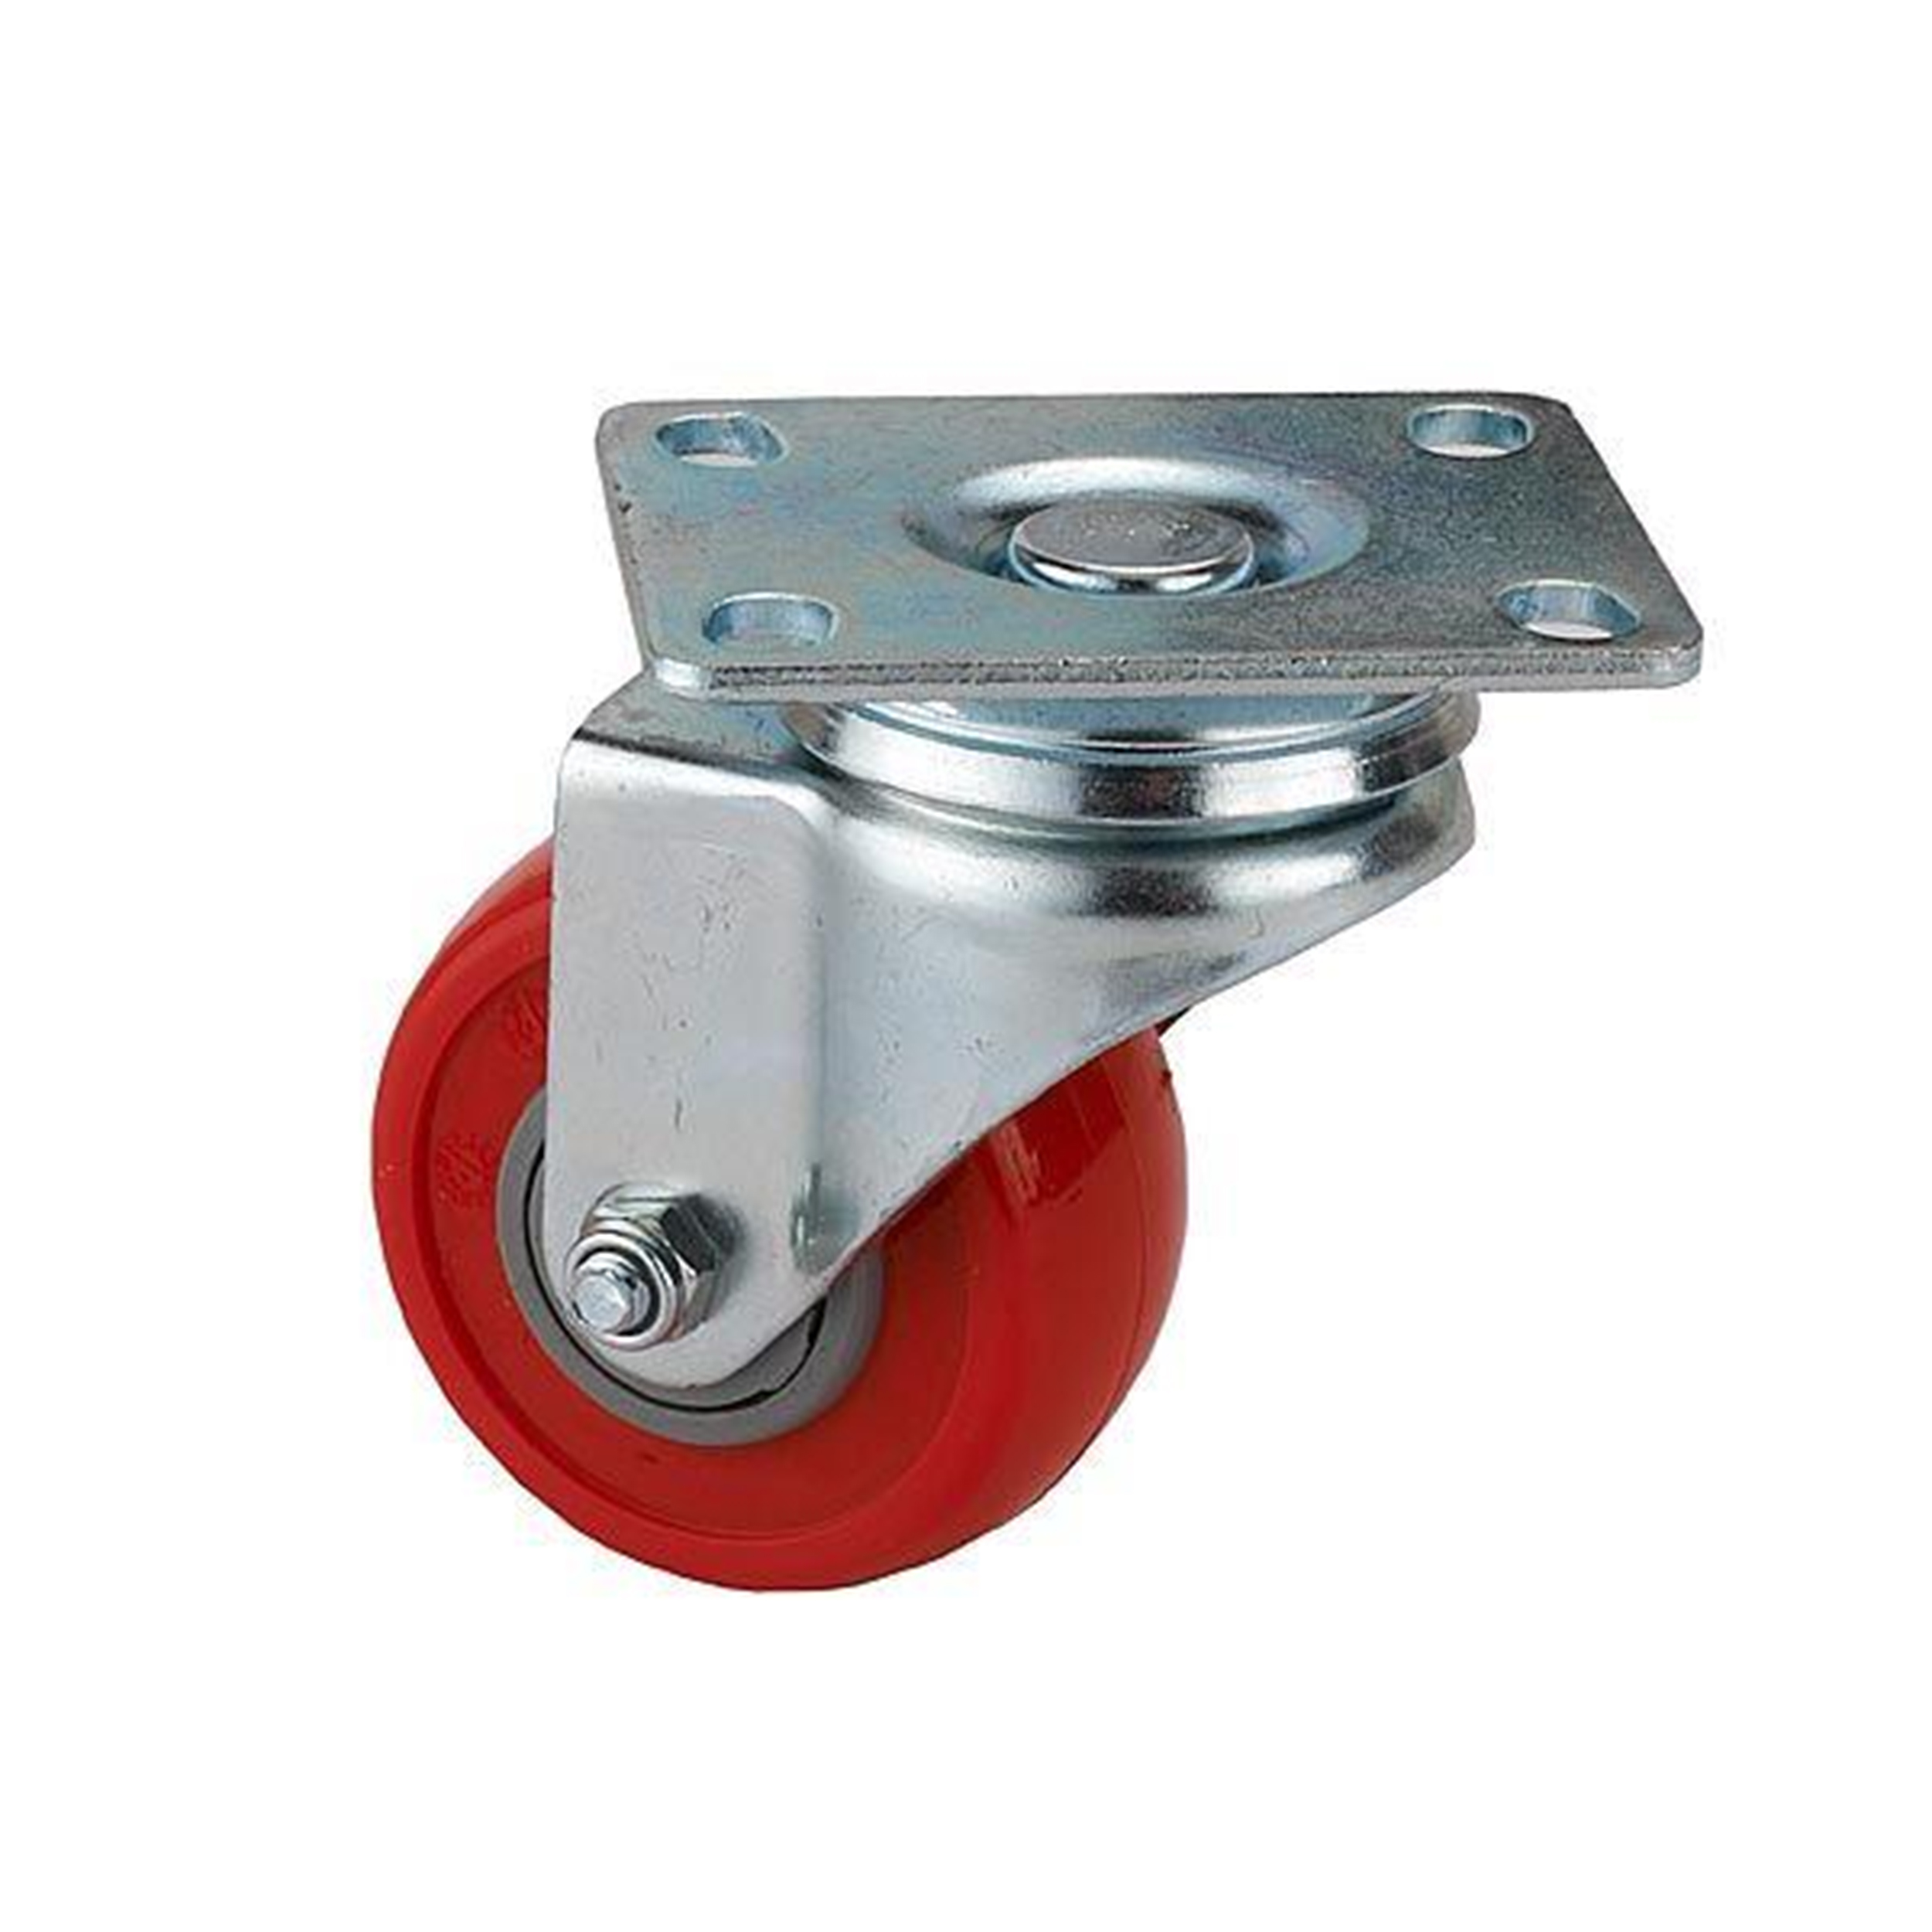 2-1/2" Caster, Swivel Plate With 4-hole Mounting 3-3/8" Tall